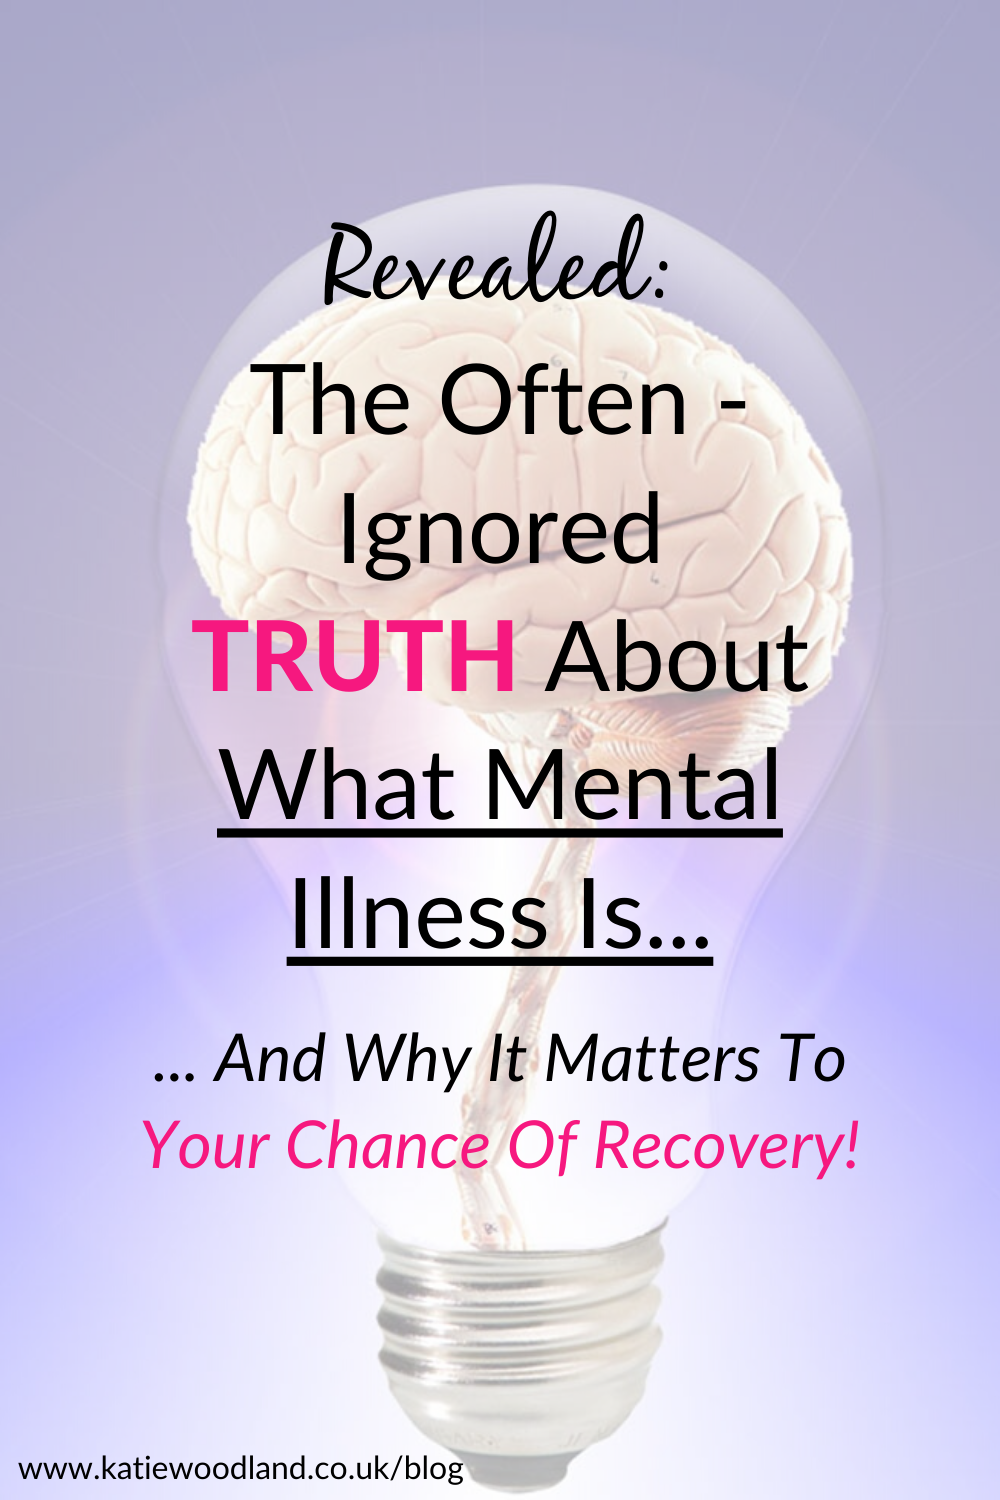 The Often-Ignored TRUTH About What Mental Health Is...  And Why It Matters To Your Chance Of Recovery!